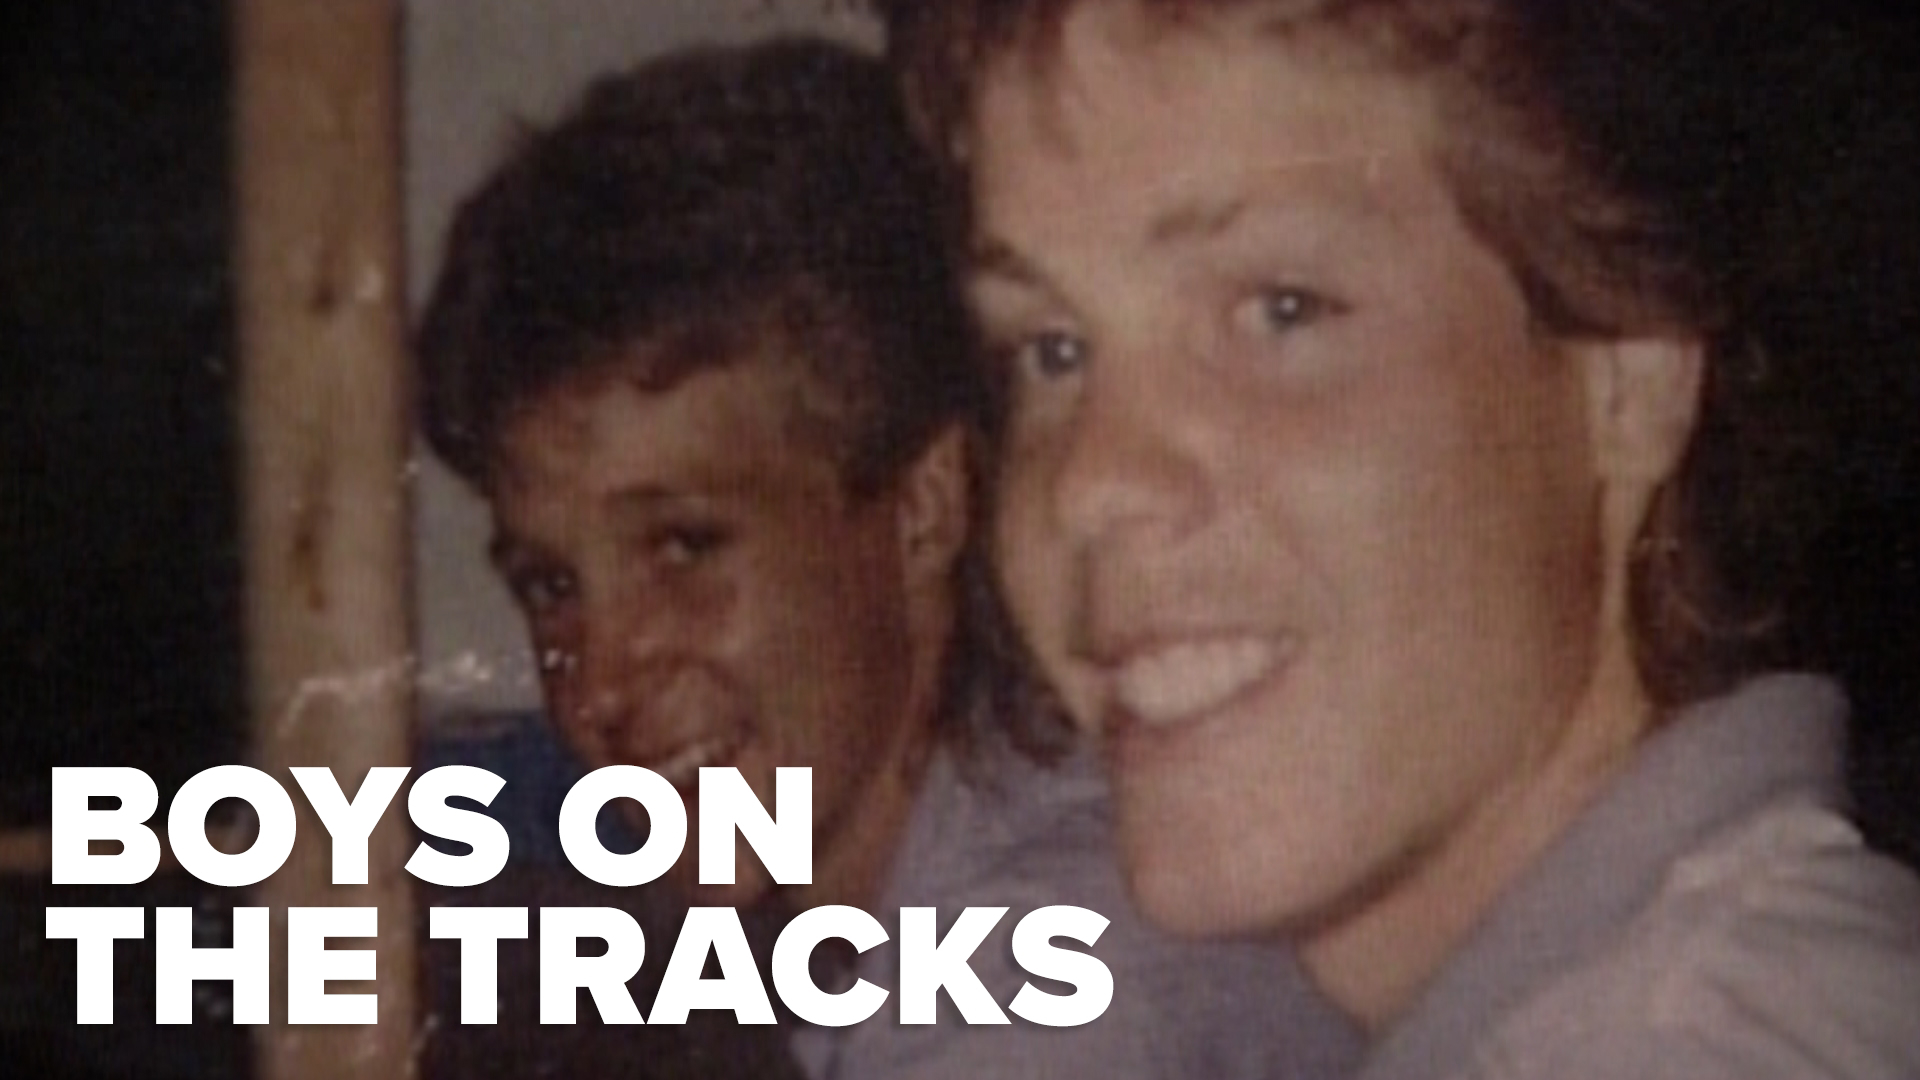 In August 2012, we looked at the deaths of Don Henry and Kevin Ives, known as "The Boys on the Tracks," and the rumors and leads that swirled around them ever since